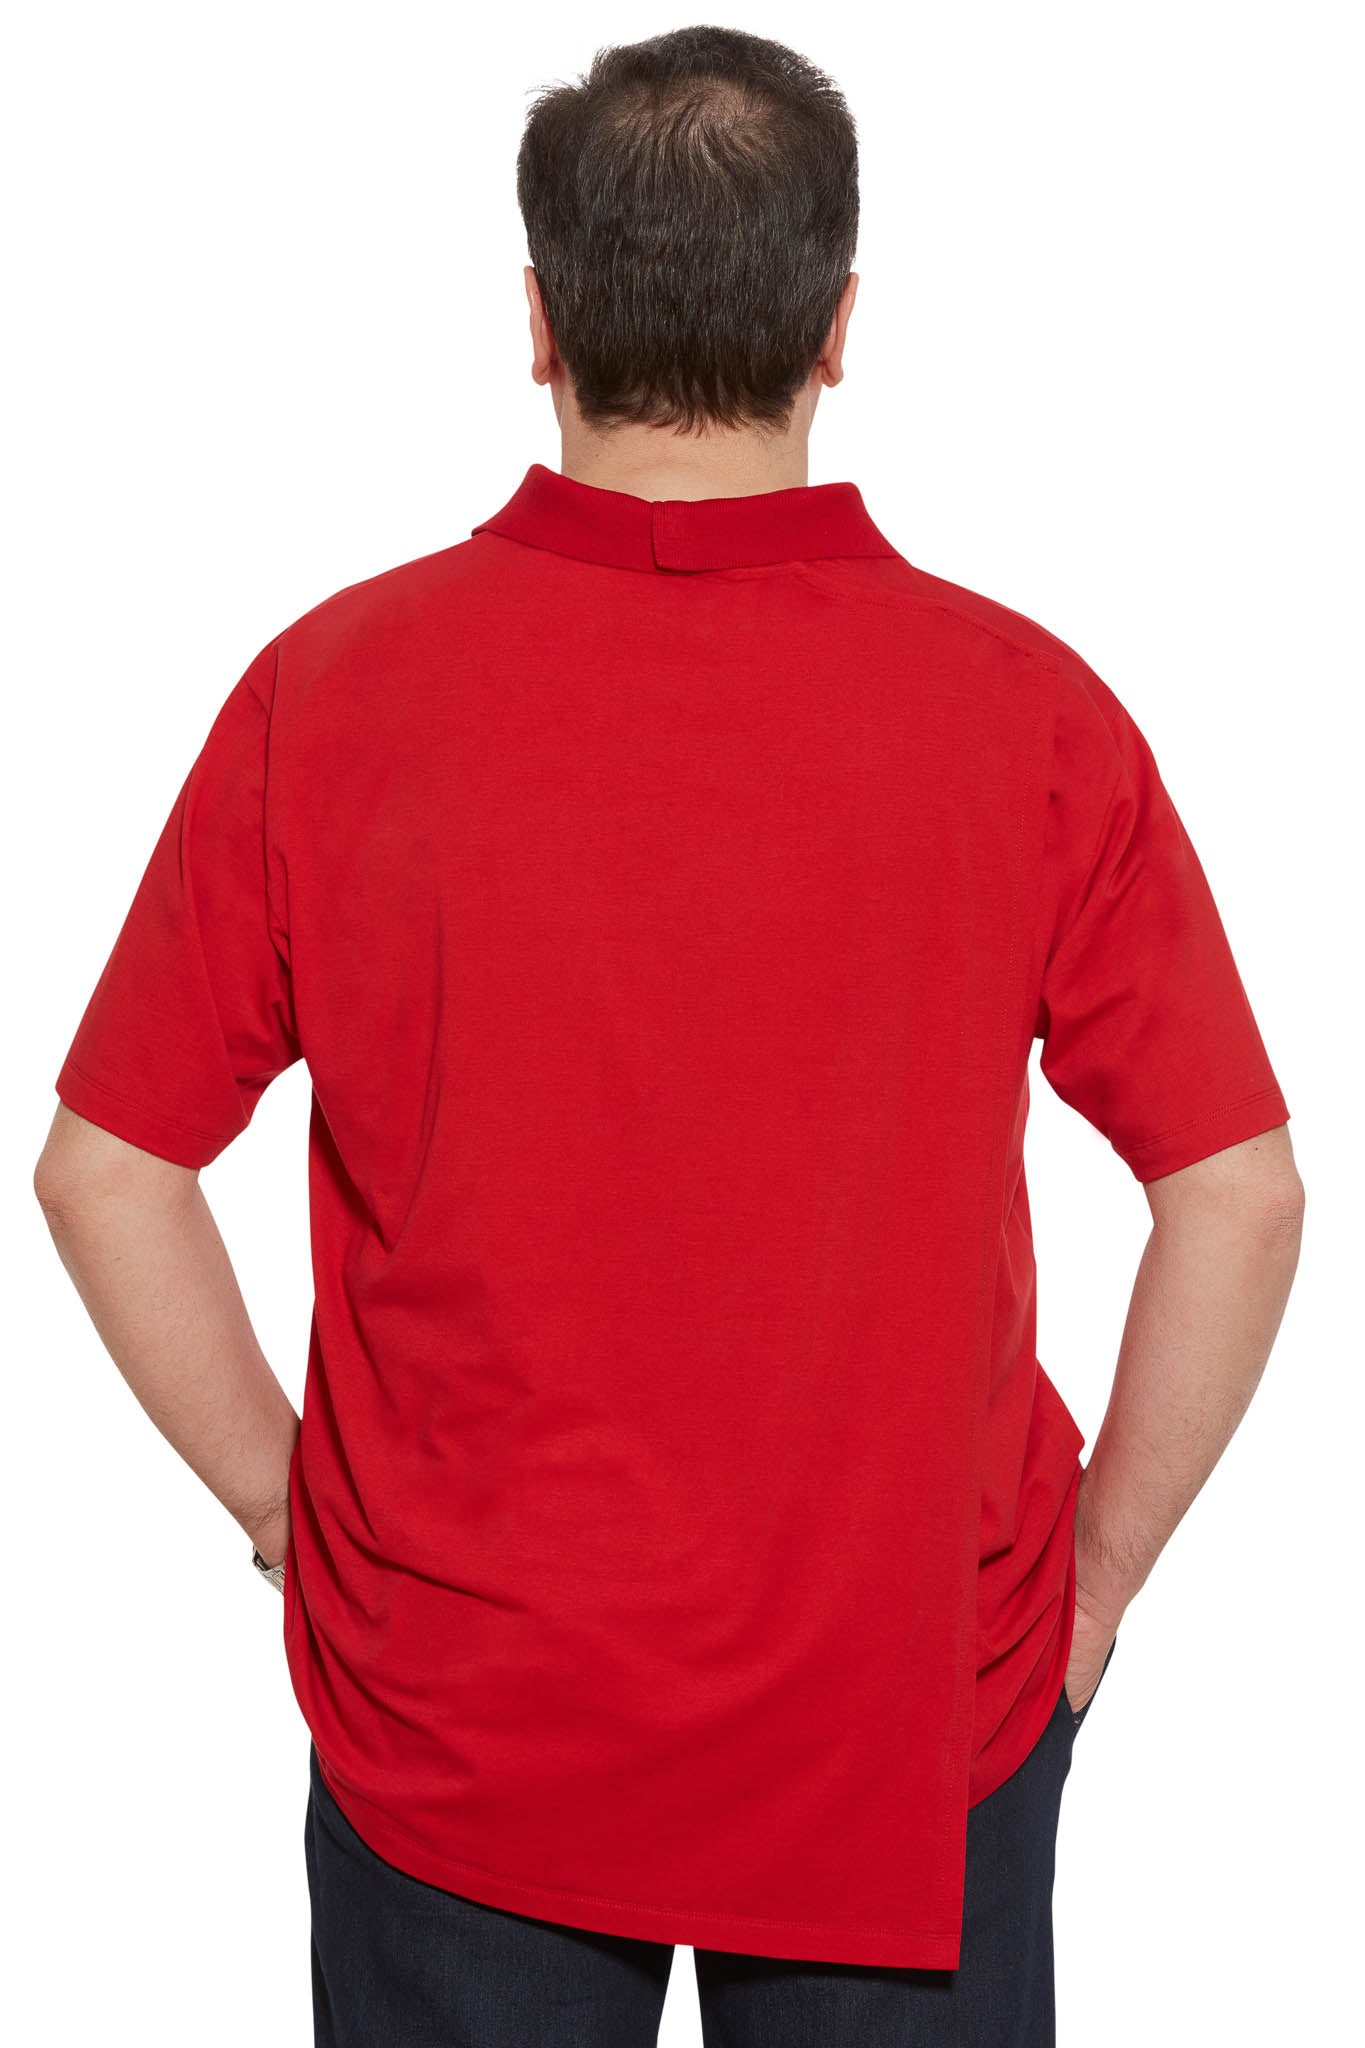 Adaptive Polo Shirt for Men | Art in Aging